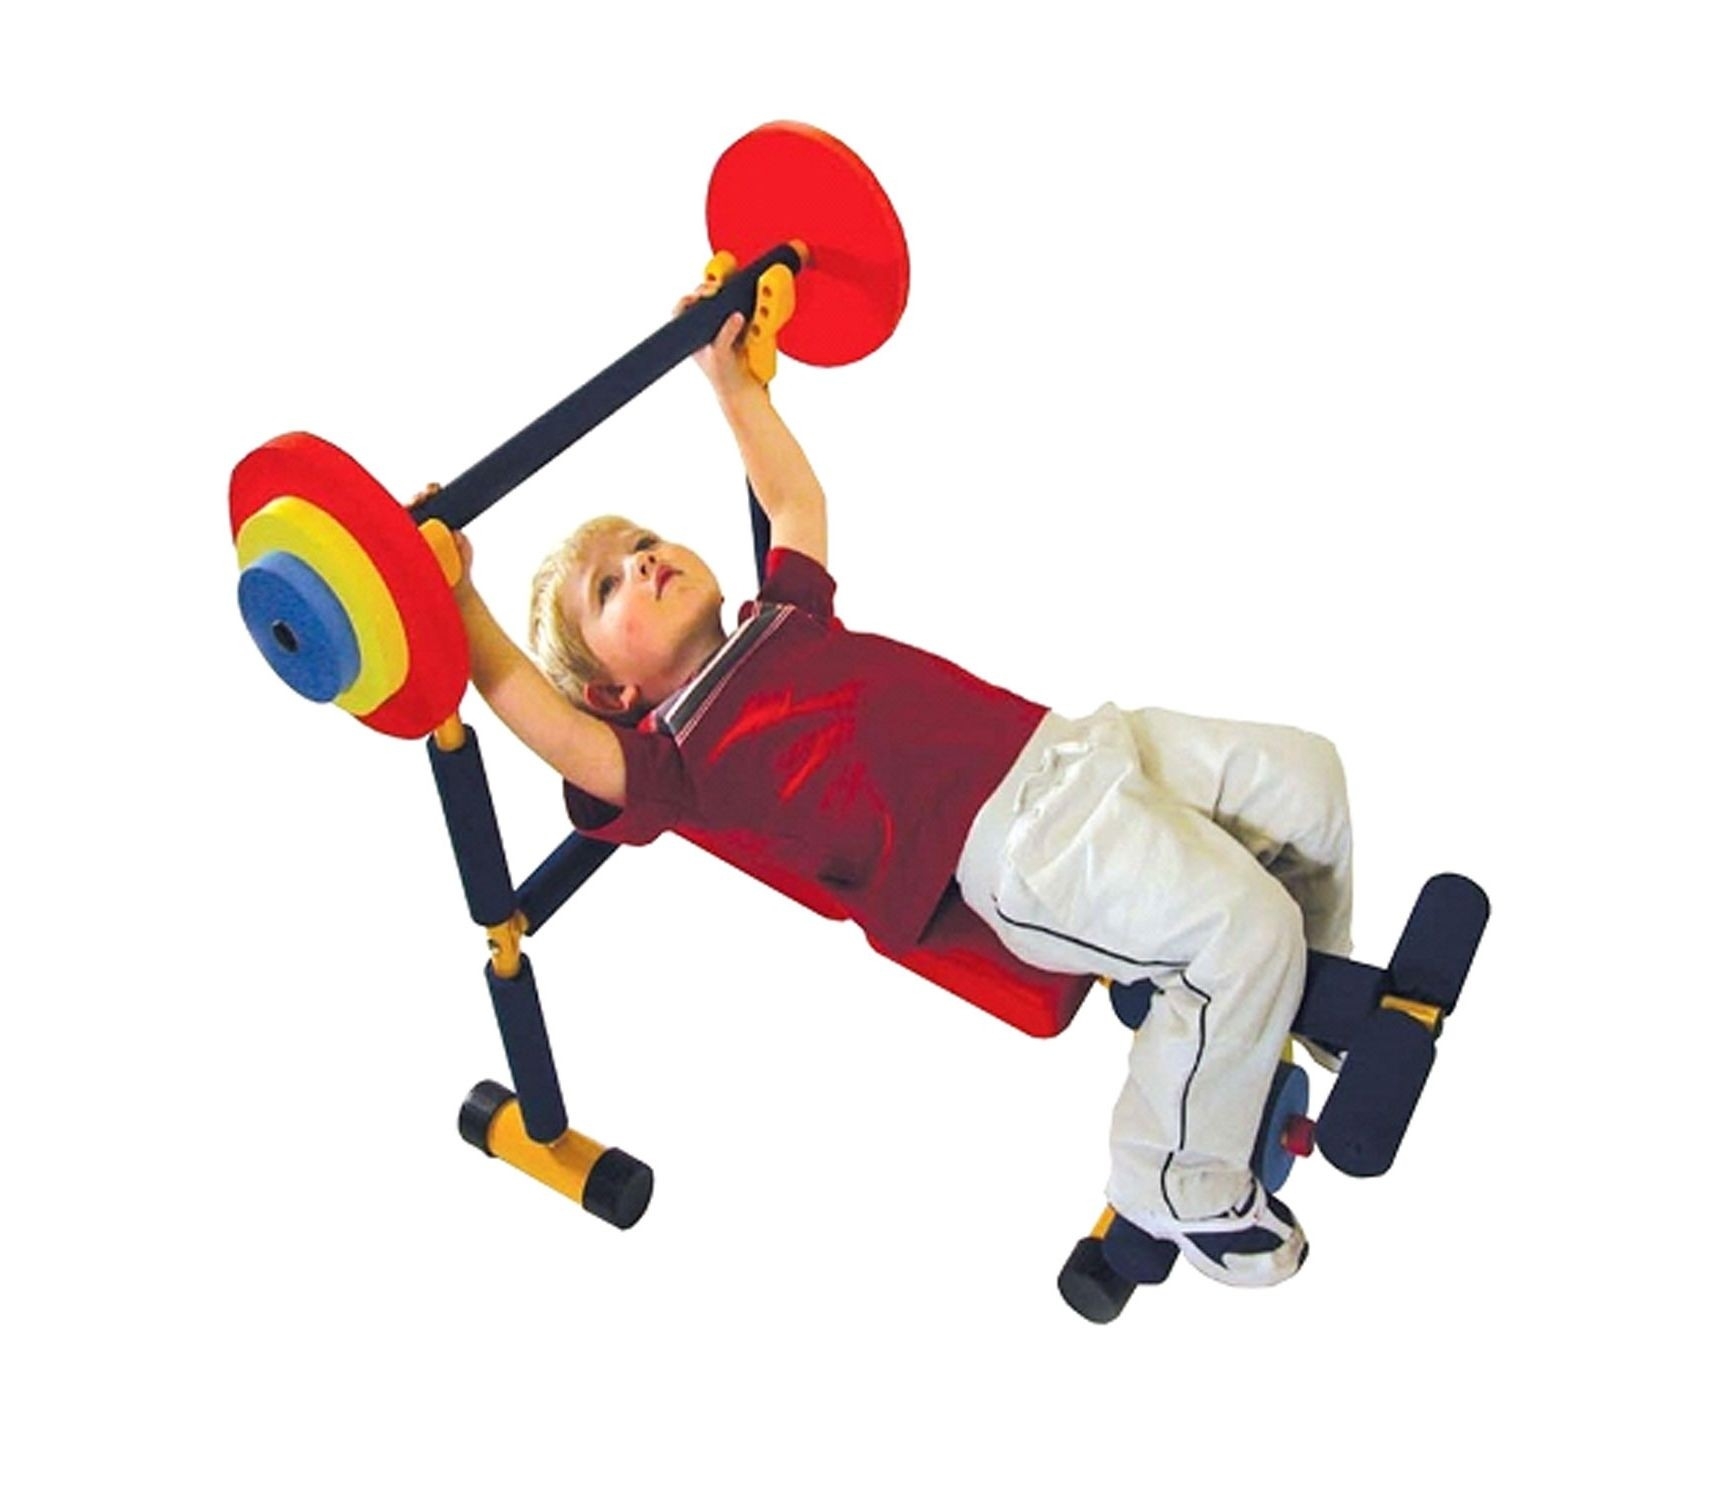 Kids Fitness Exercise Equipment, Weight Bench Set Adjustable Barbell Set,  Gym Workout Fitness for Kids Gym Home, Fun Exercise Toy Bench And Leg Press